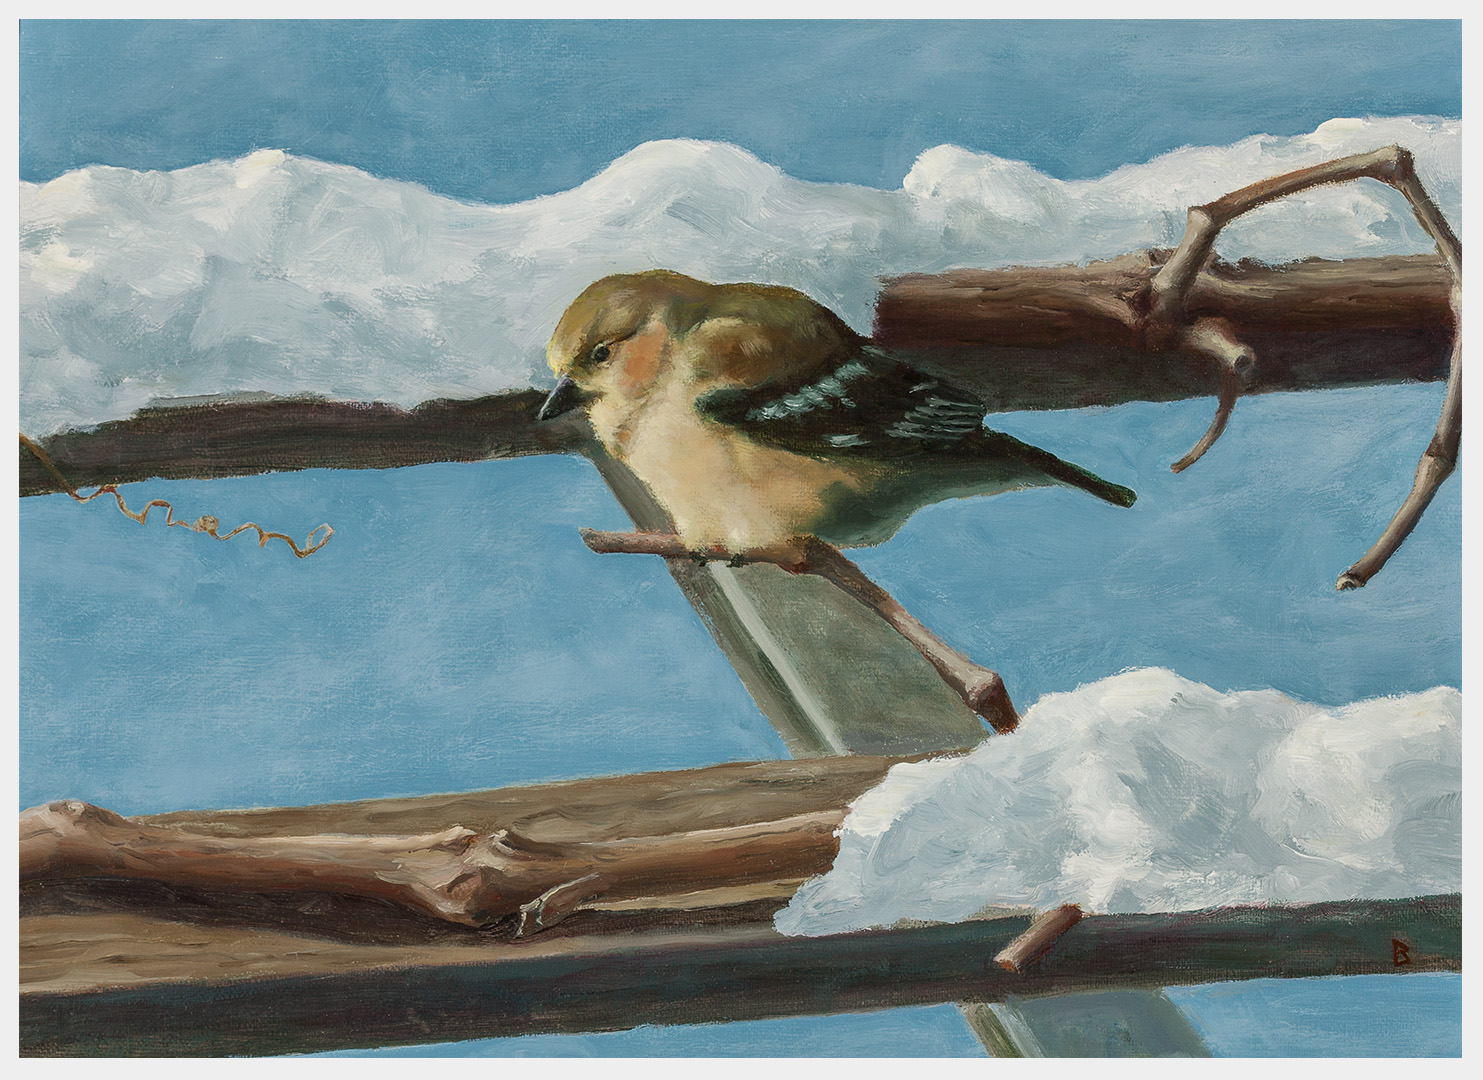 Realistic oil painting of a goldfinch in winter plumage perched on a grapevine amid snow on a pergola